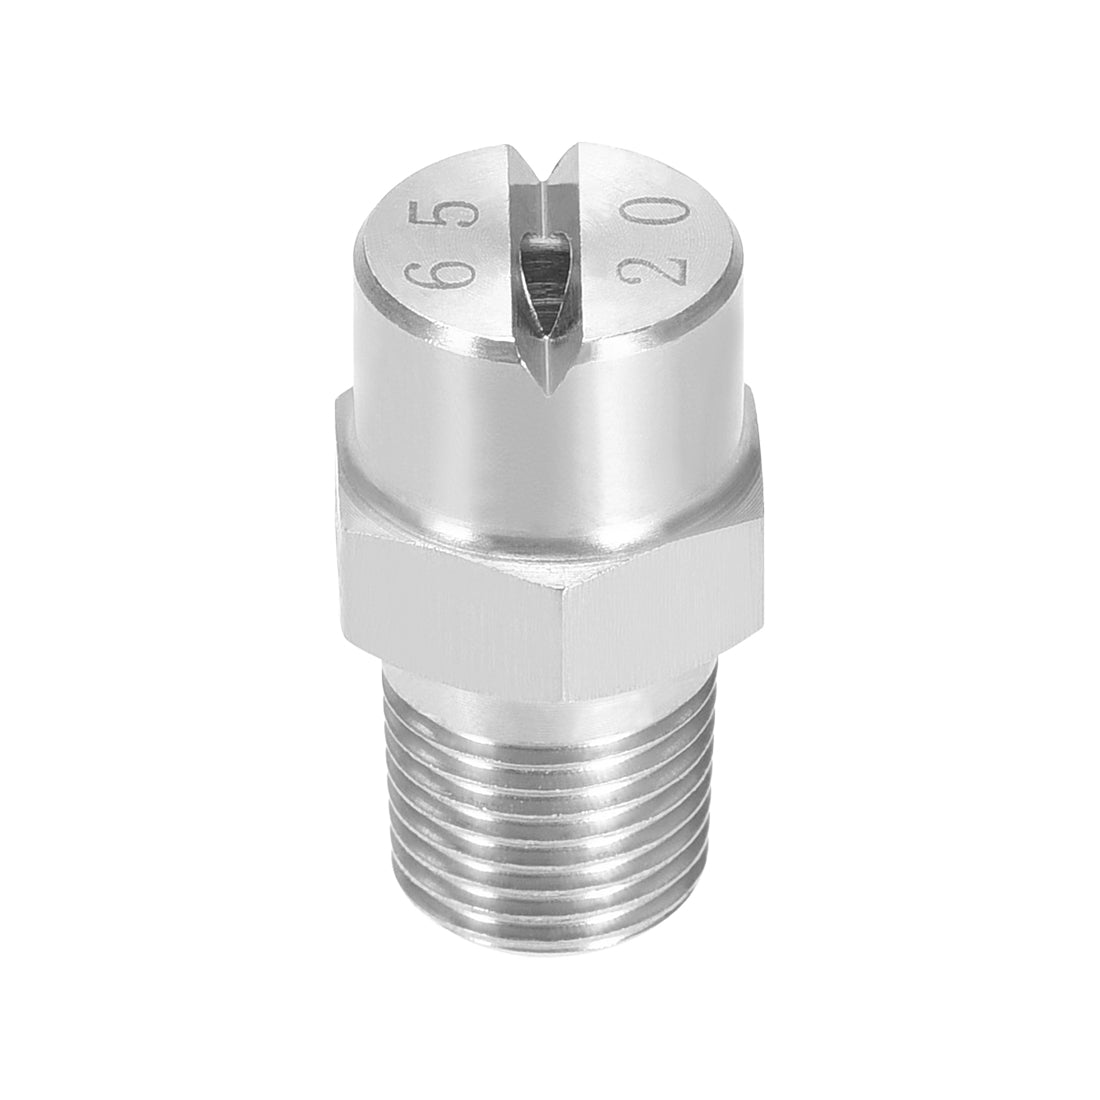 Uxcell Uxcell Flat Fan Spray Tip - 1/8BSPT Male Thread 304 Stainless Steel Nozzle - 65 Degree 1.1mm Orifice Diameter